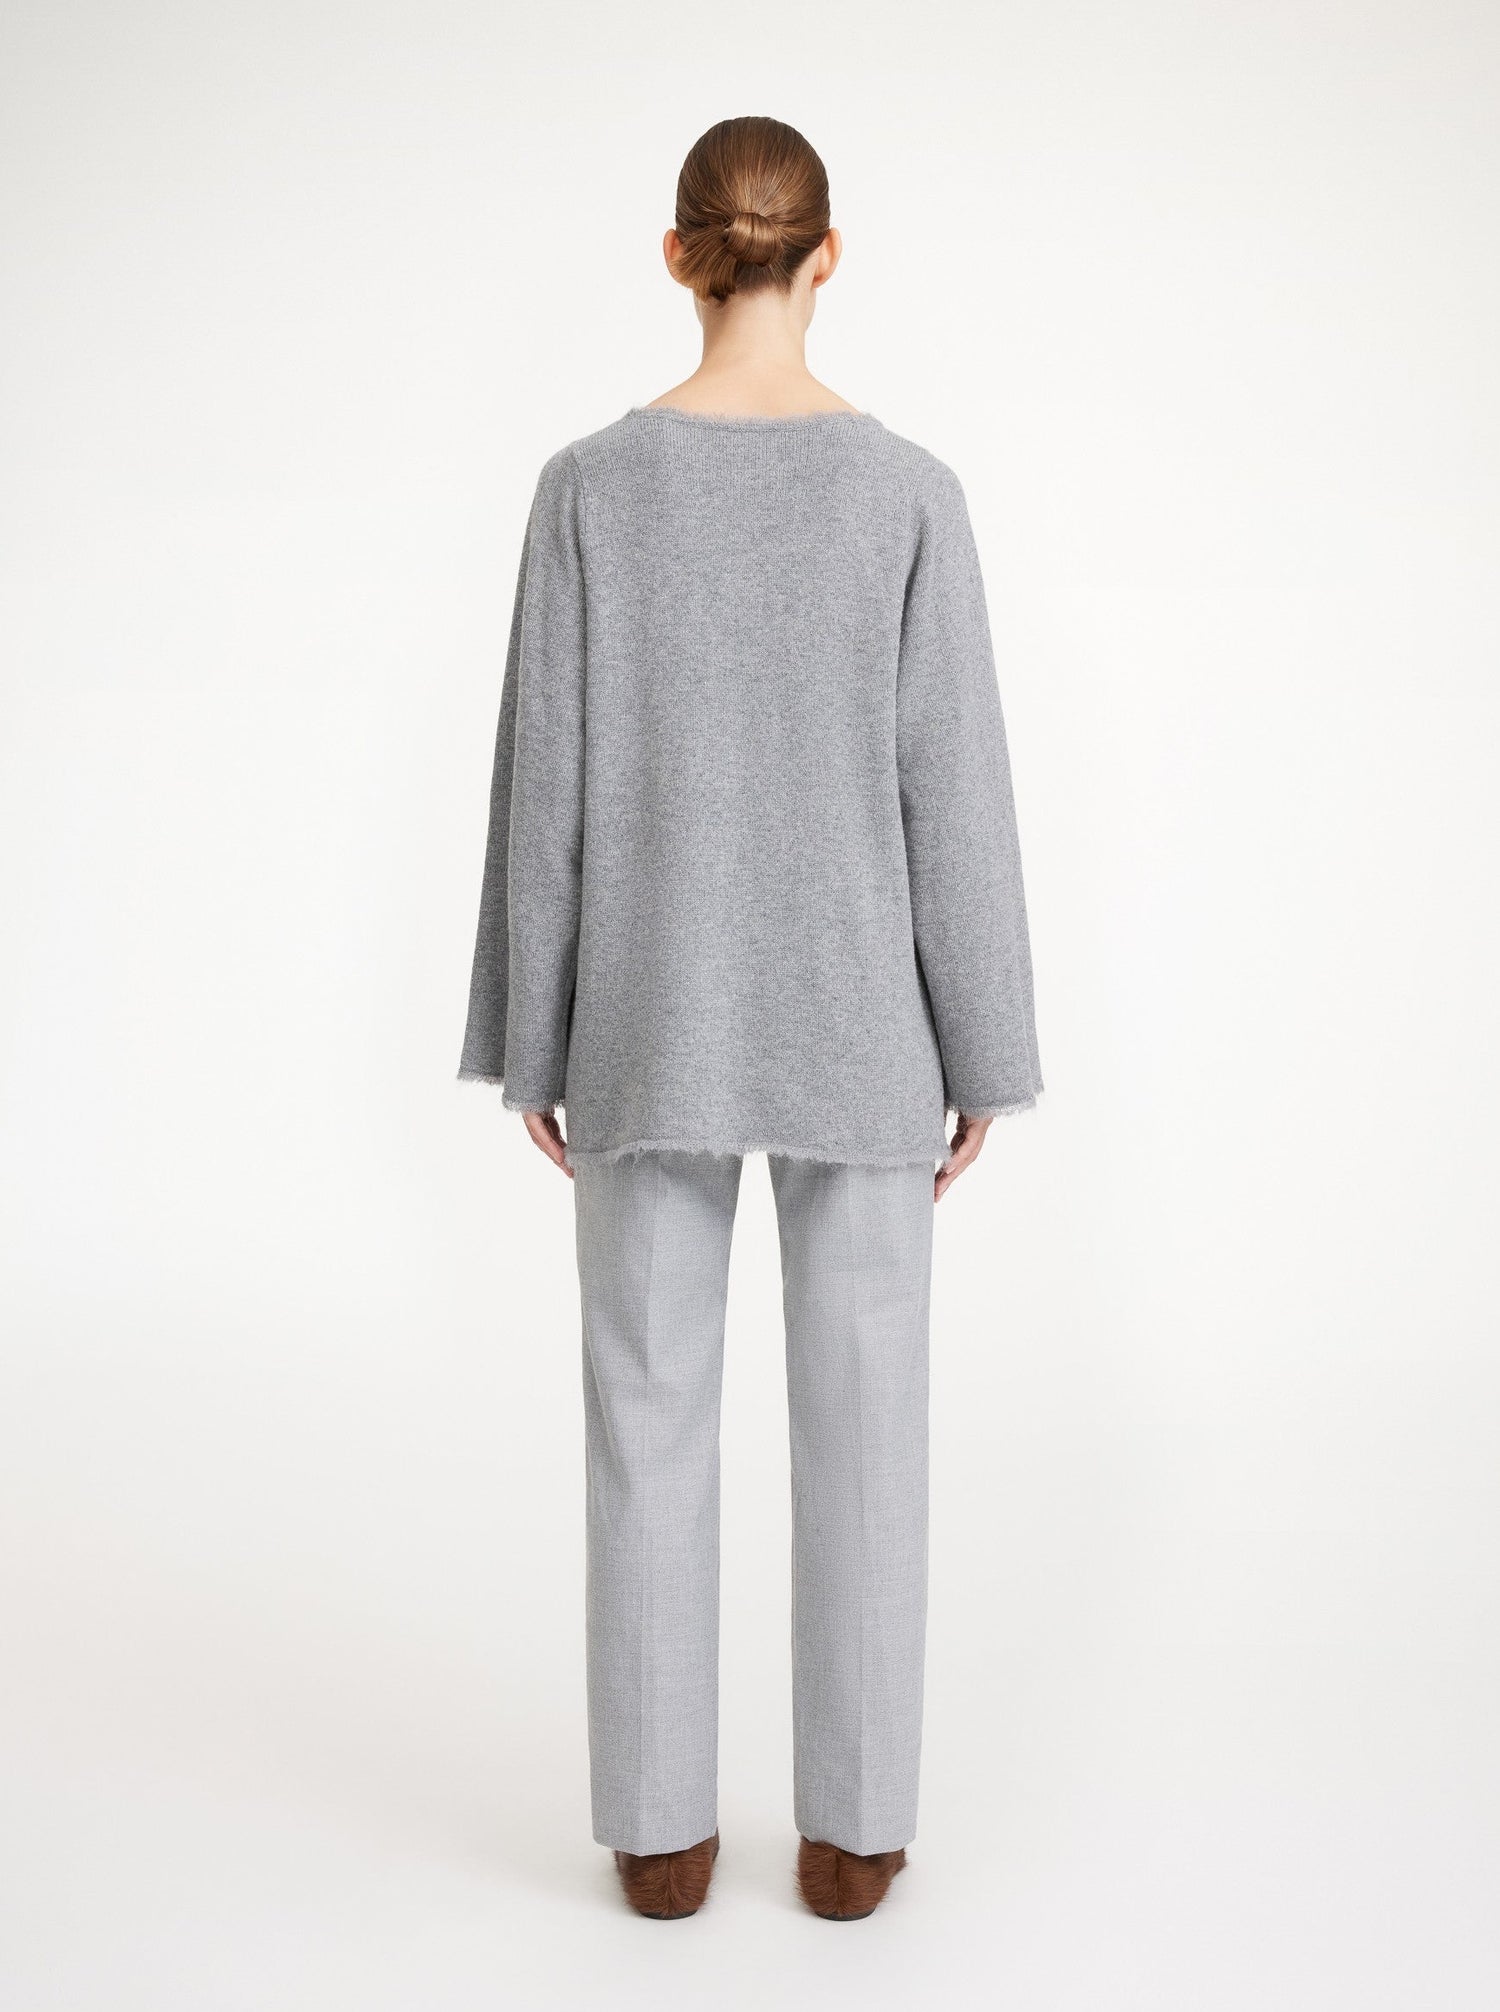 LUISE knitted sweater, grey